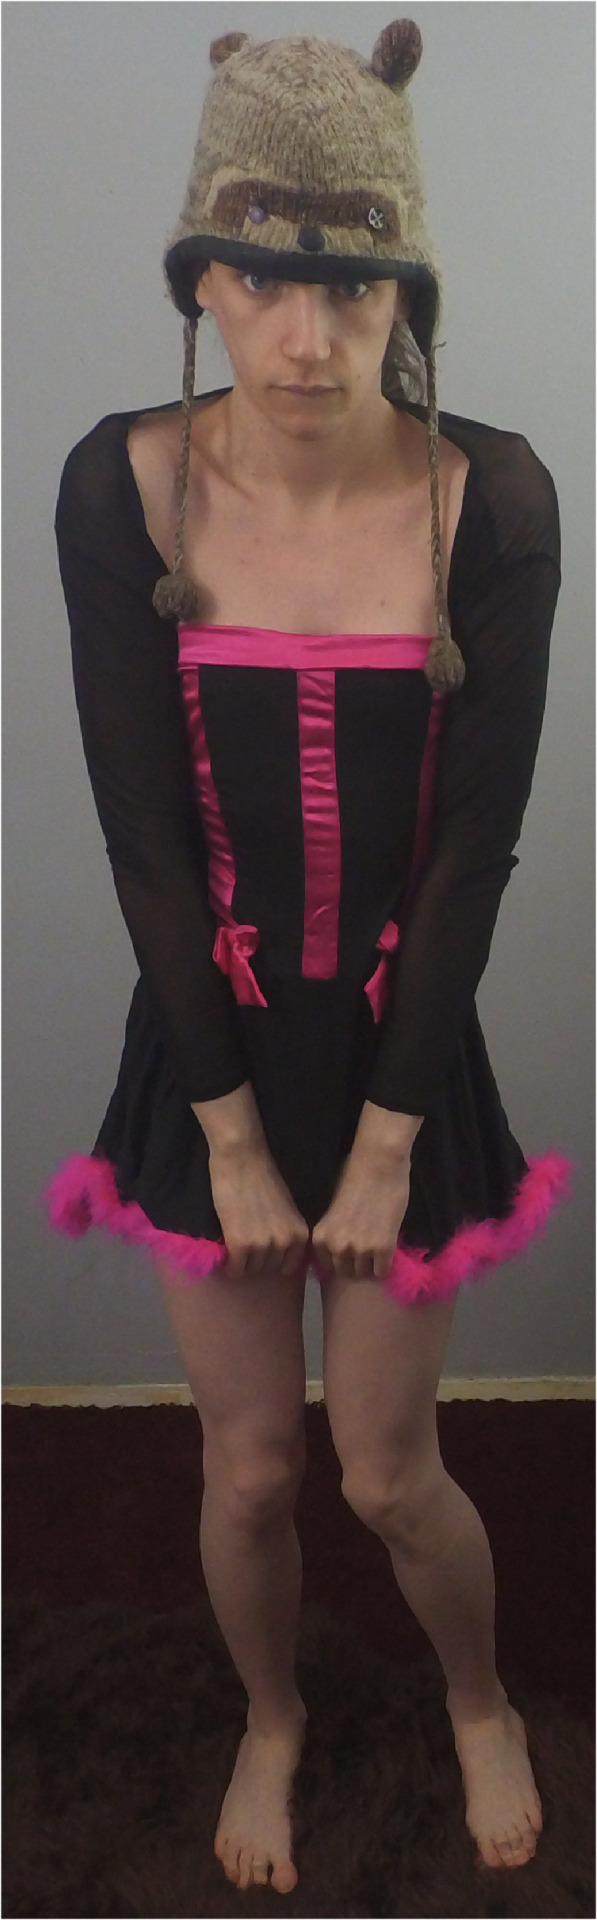 More of the pink and black number. Still thinking of a name for it before I add it